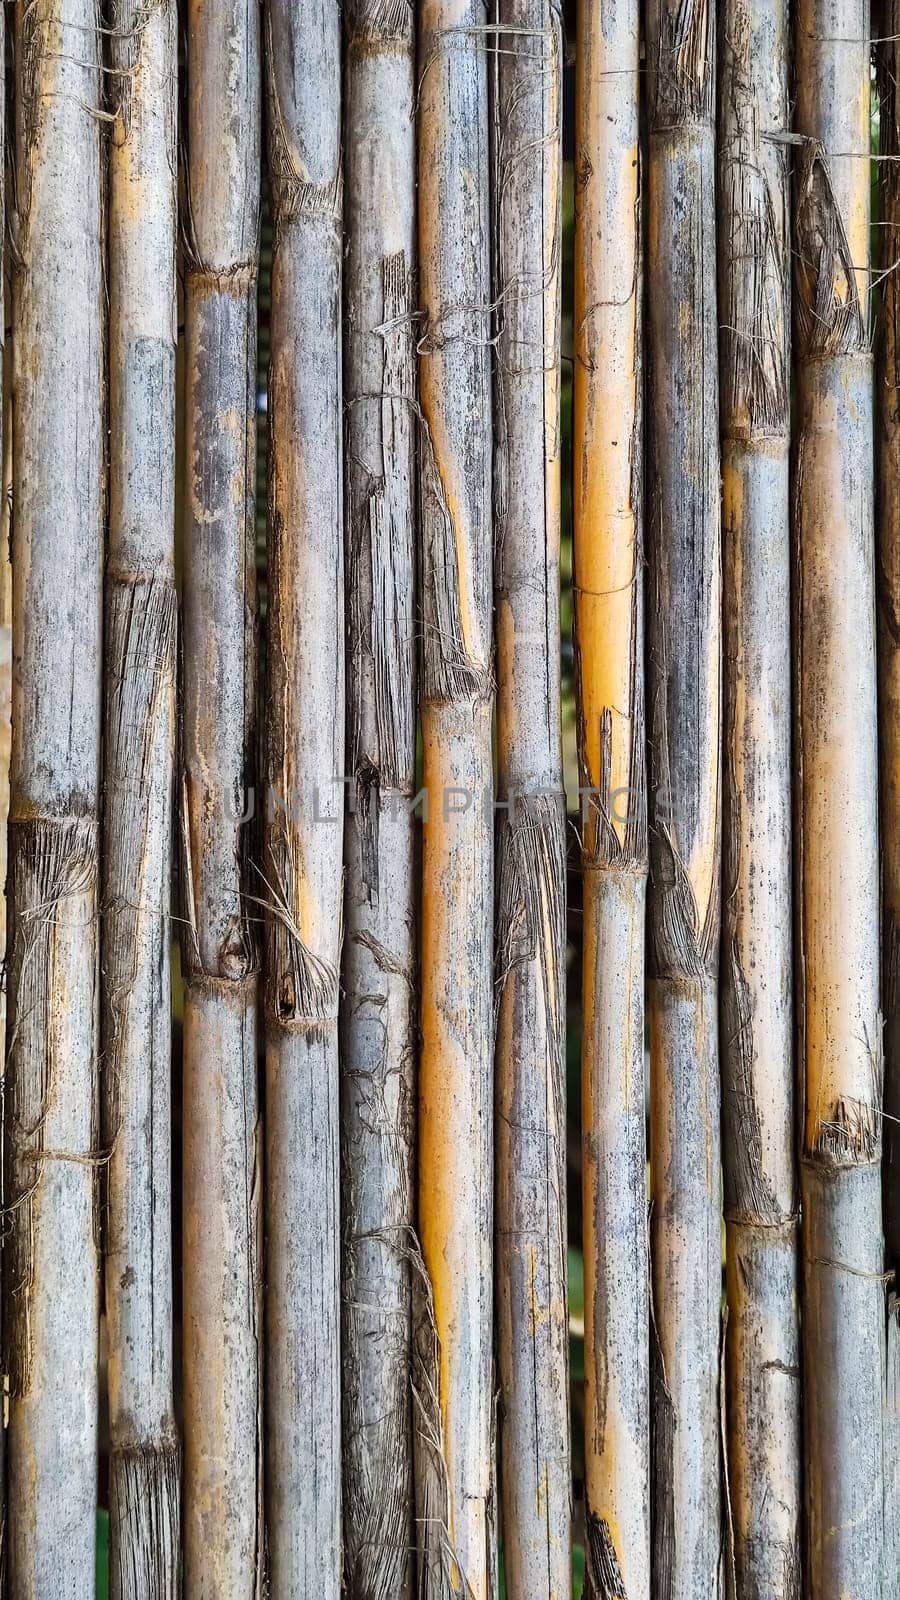 Background texture of dry bamboo cane. Flat lay, vertical frame by Laguna781